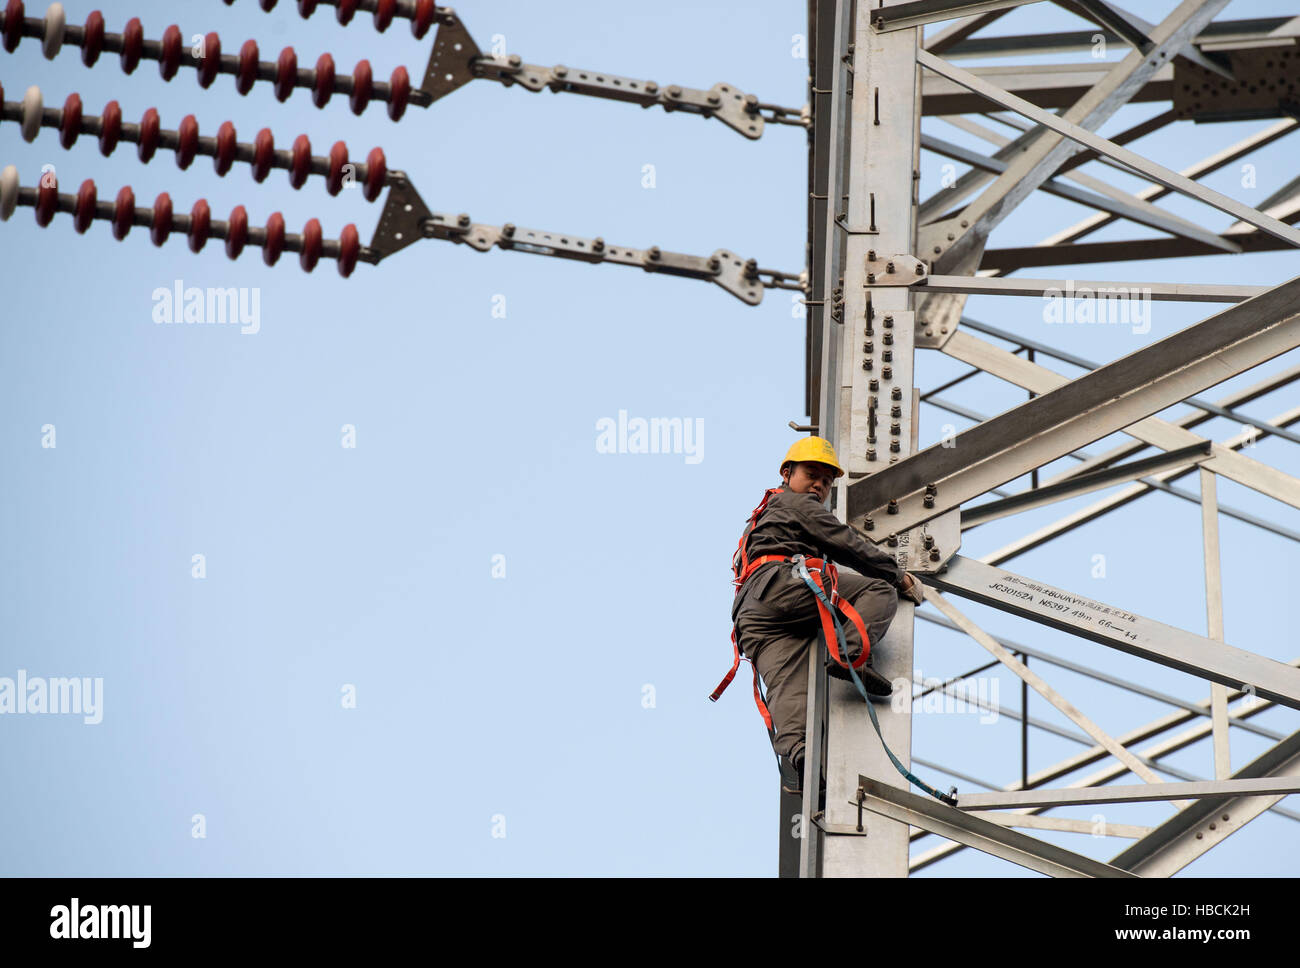 Chongqing. 6th Dec, 2016. A technician inspects the tower of the ¡À800KV Ultra High Voltage (UHV) transmission line in Wushan County of southwest China's Chongqing, Dec. 6, 2016. The ¡À800KV UHV transmission line will run 2,383 meters from Jiuquan in northwest China's Gansu Province to Xiangtan in central China's Hunan Province. It's so far the longest transmission line of its kind in China. © Liu Chan/Xinhua/Alamy Live News Stock Photo